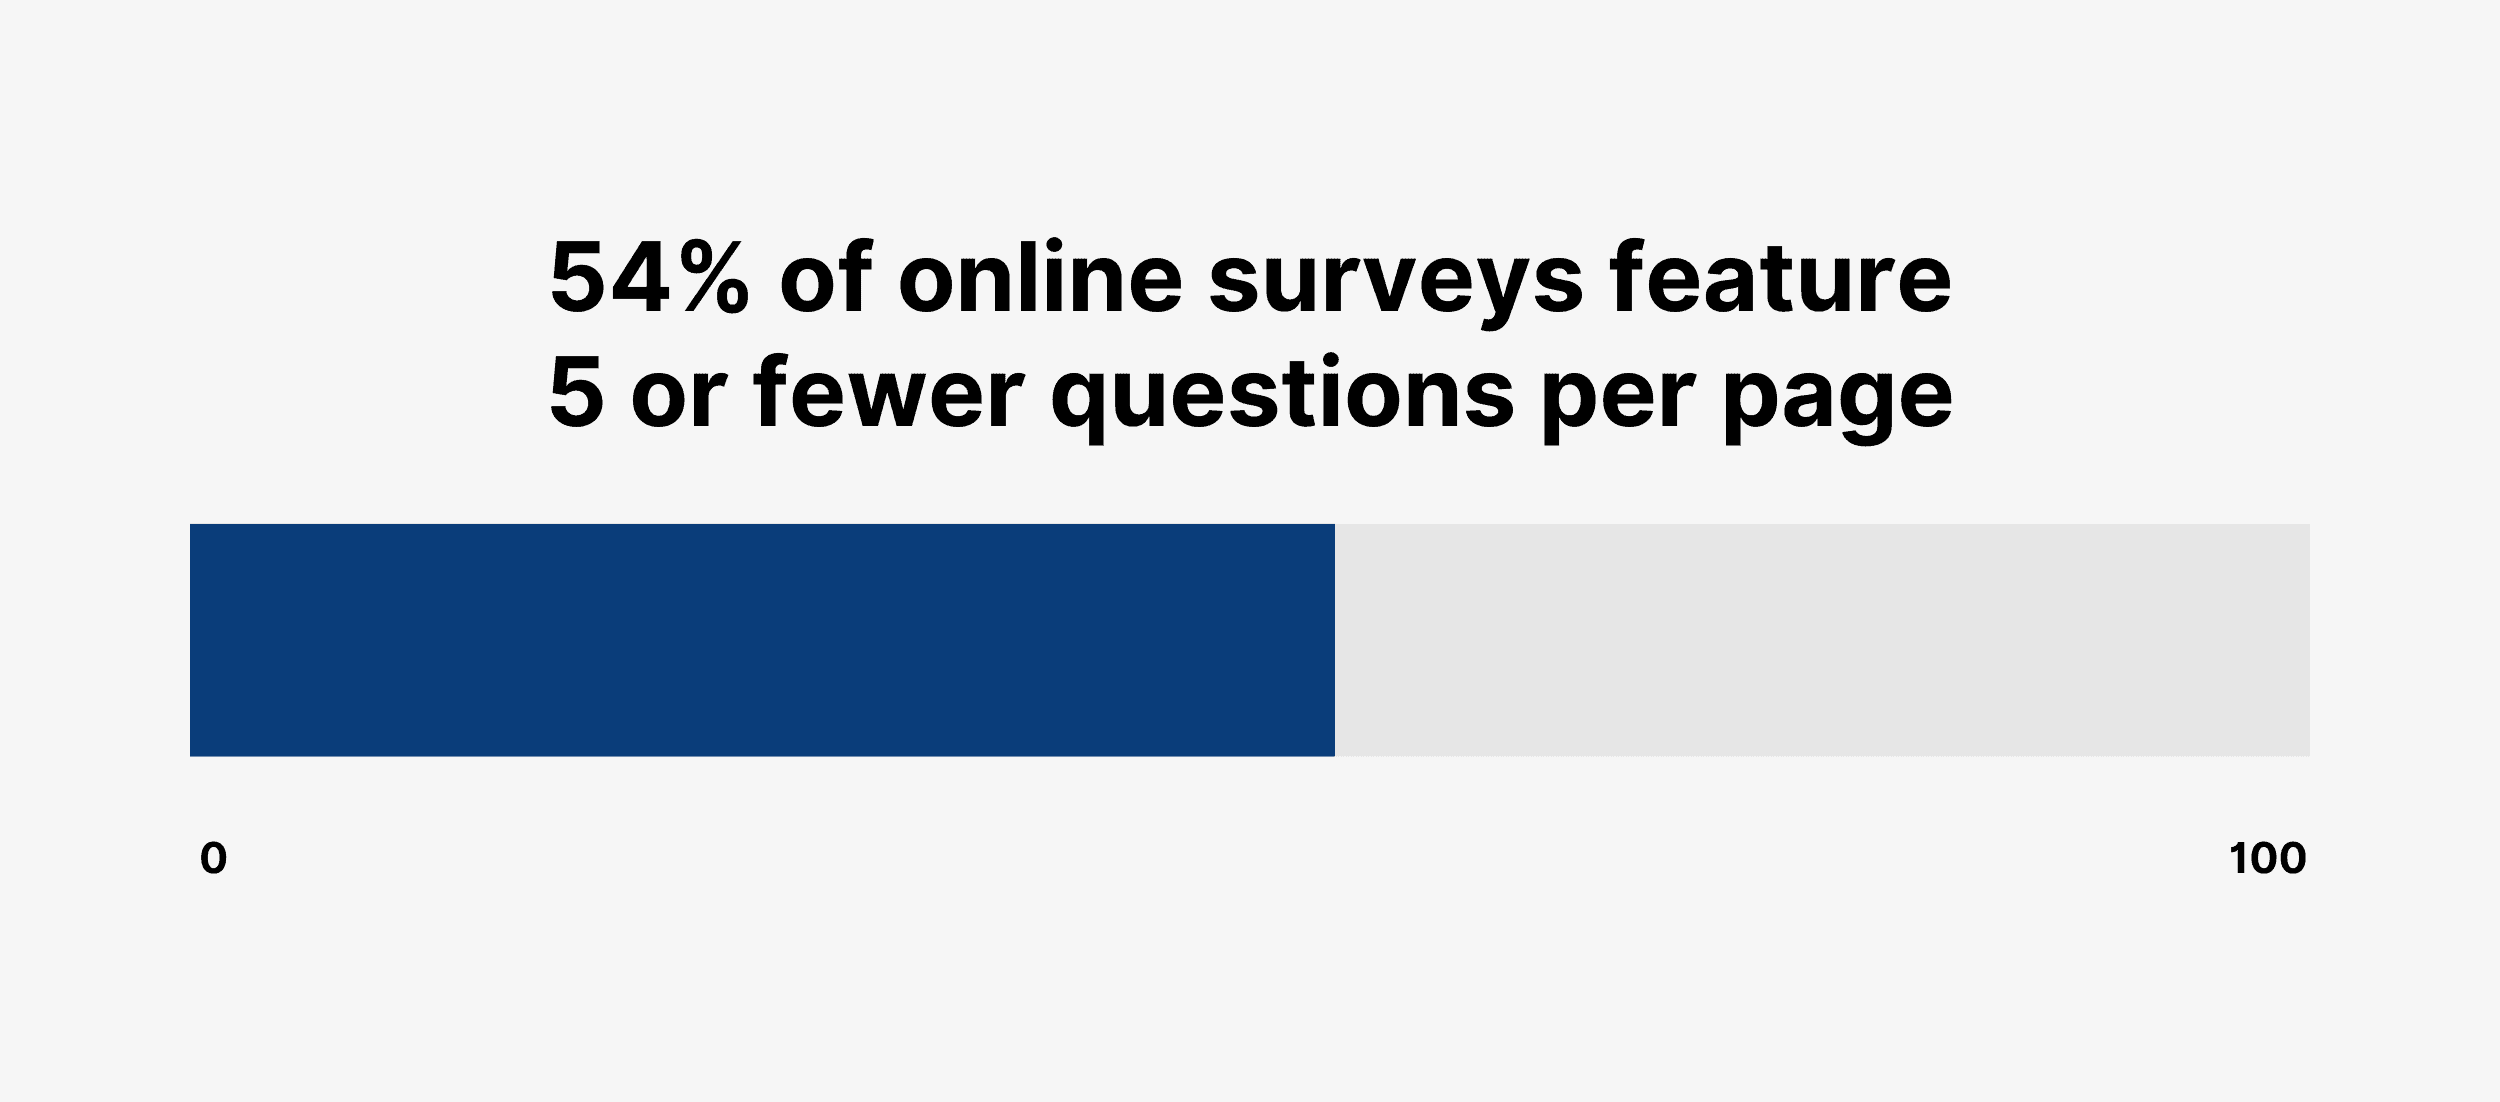 54% of online surveys feature 5 or fewer questions per page